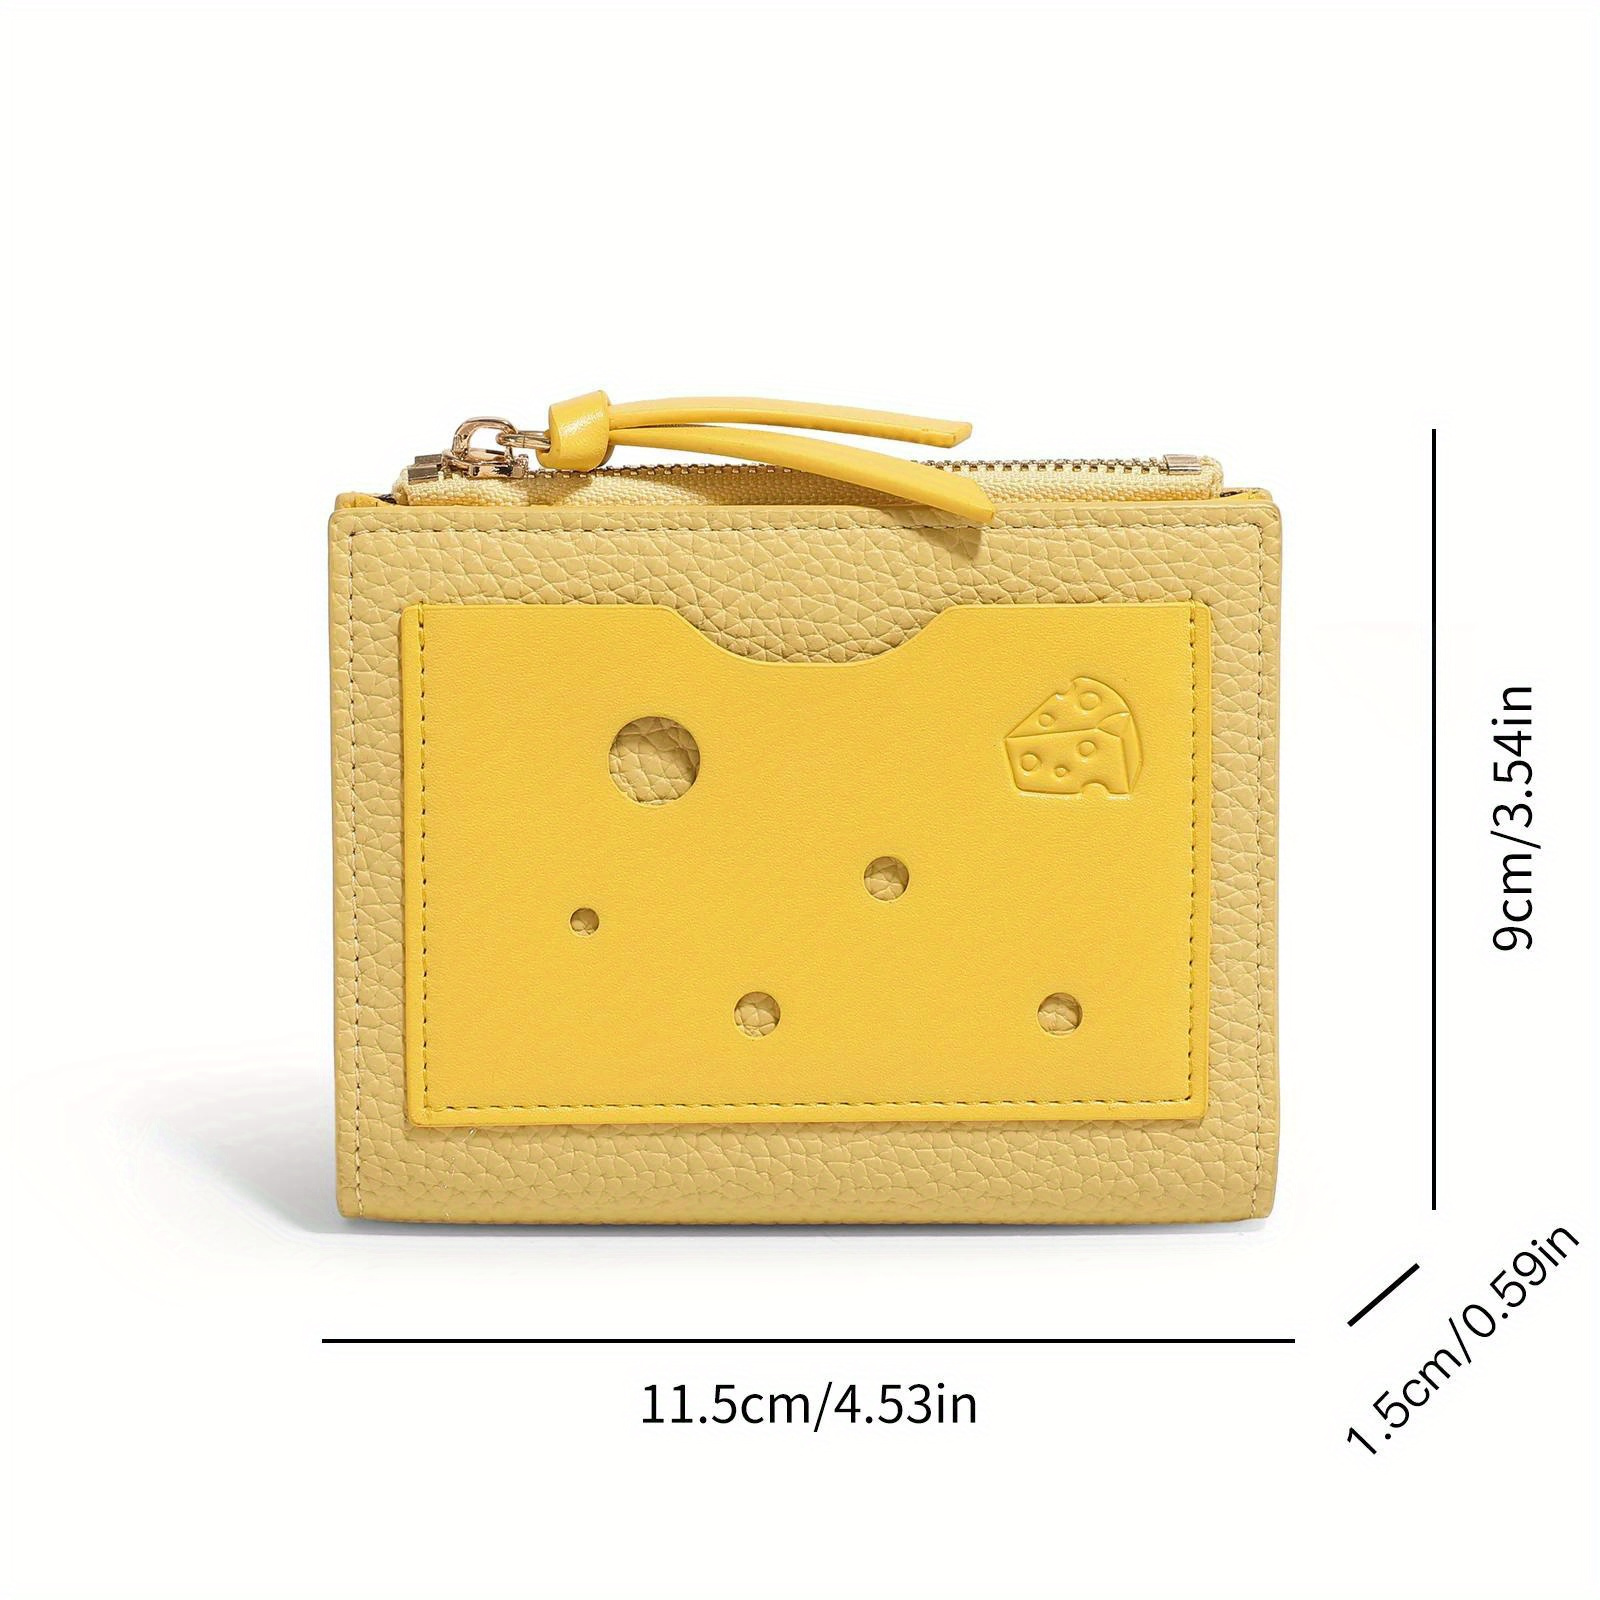 1pc Girl's Cute Cheese Pattern Short Wallet, RFID Blocking Bifold Zipper Credit Card Holder, Girl's PU Leather Small Wallet With Card Slots